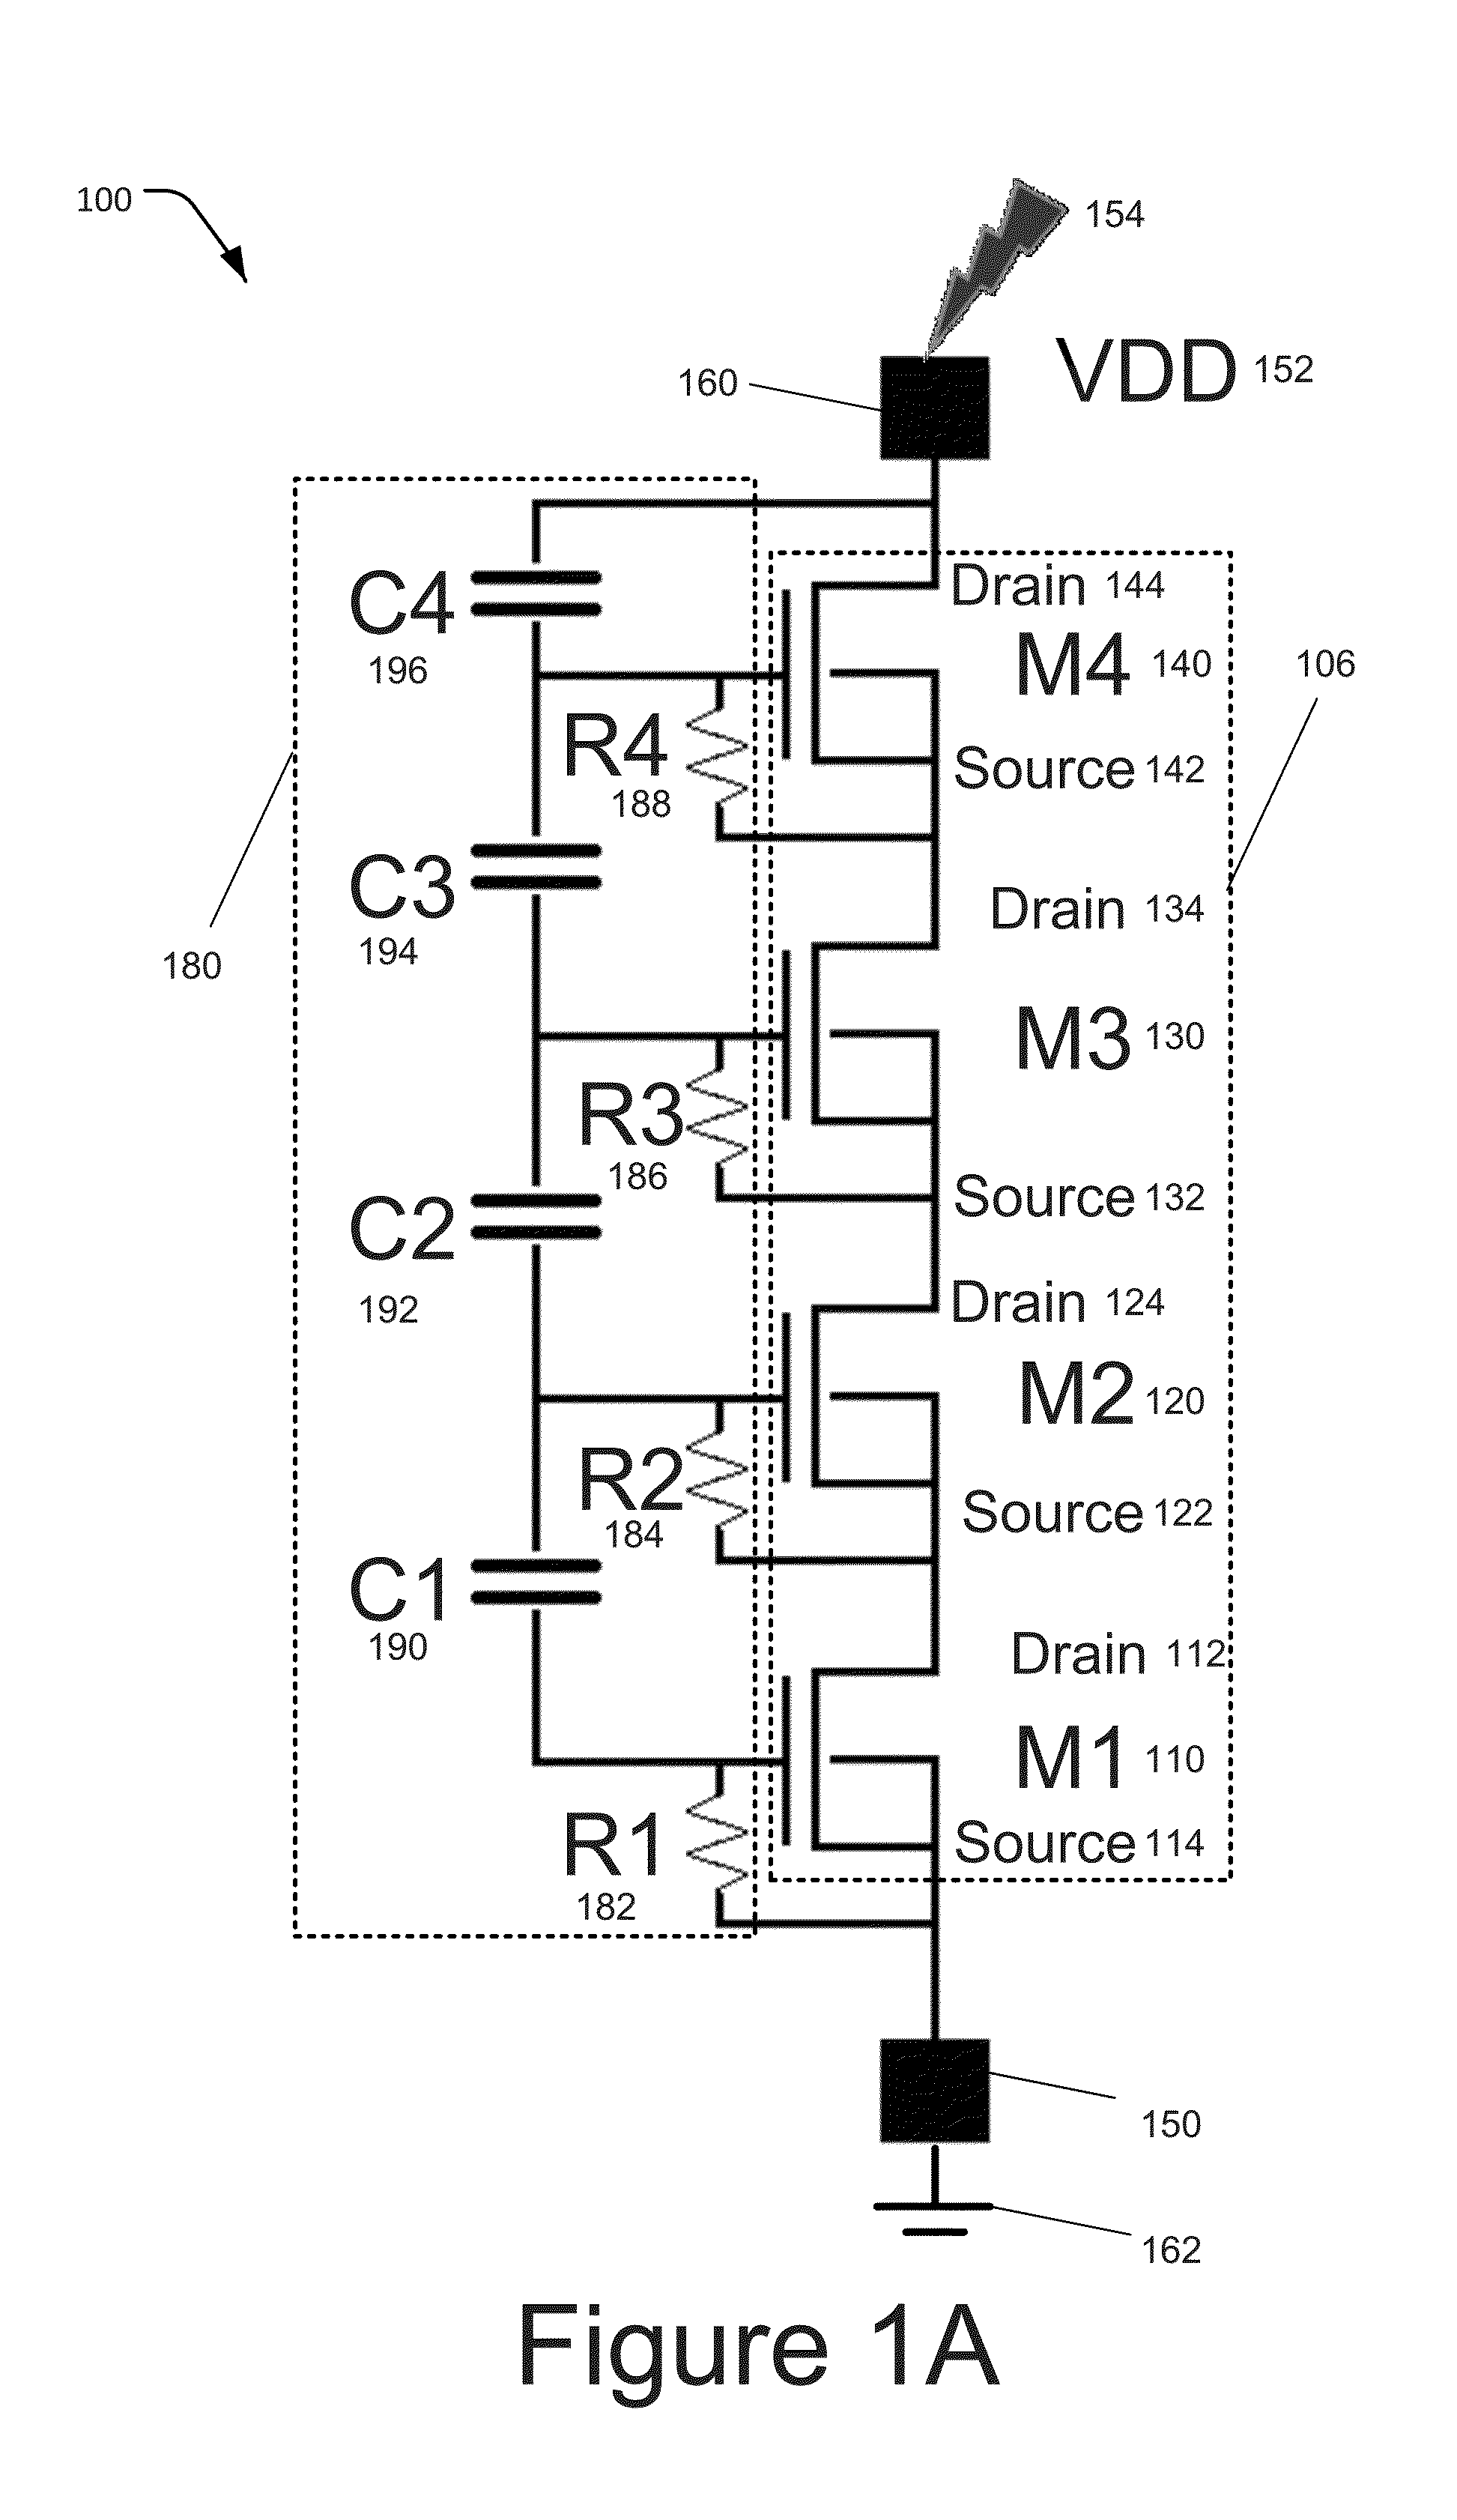 Rc-stacked mosfet circuit for high voltage (HV) electrostatic discharge (ESD) protection